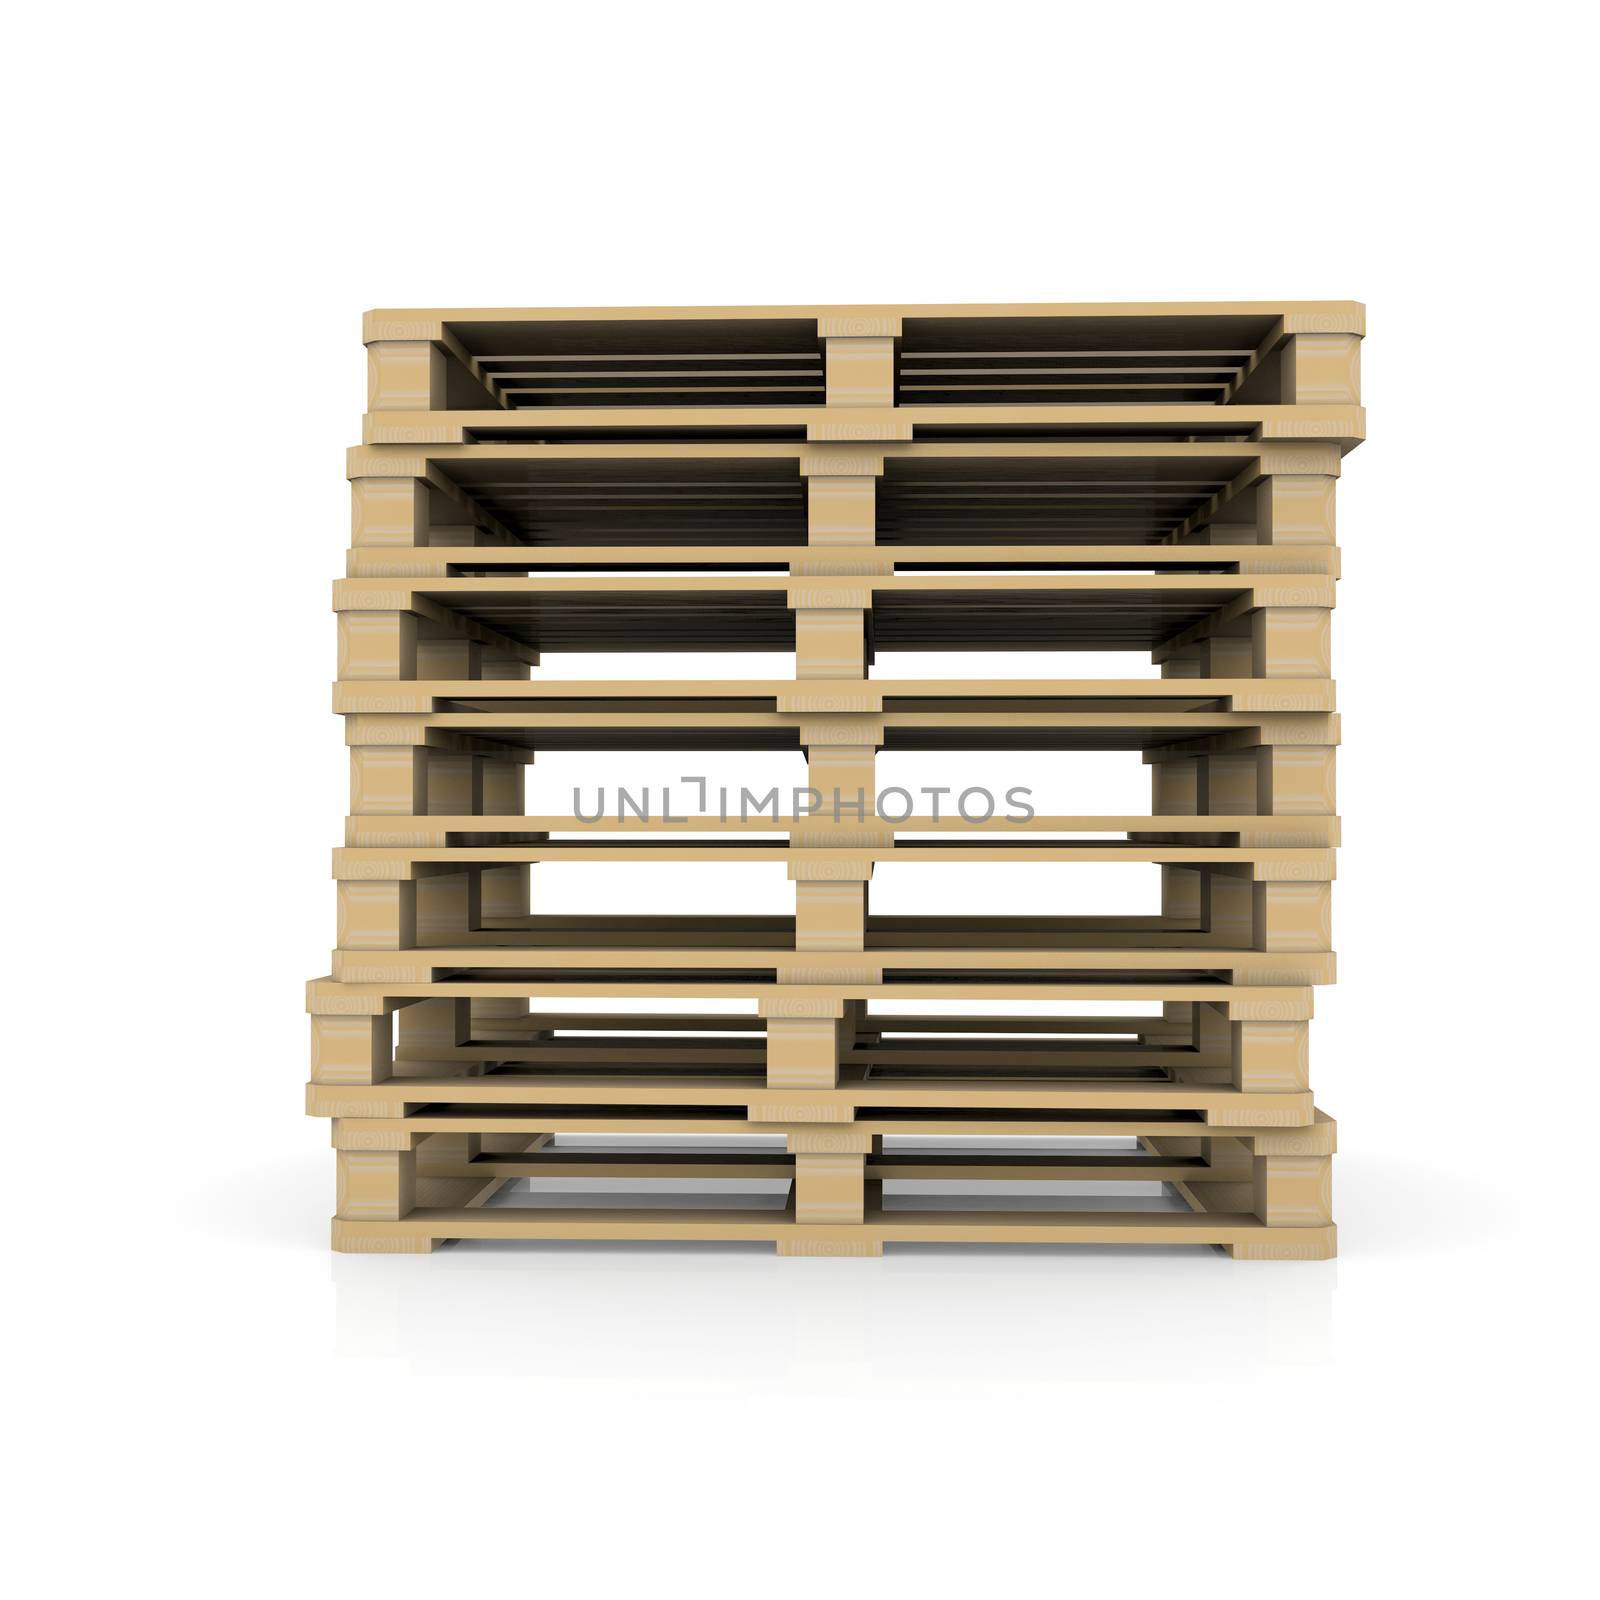 Group wooden pallets. Isolated render on a white background